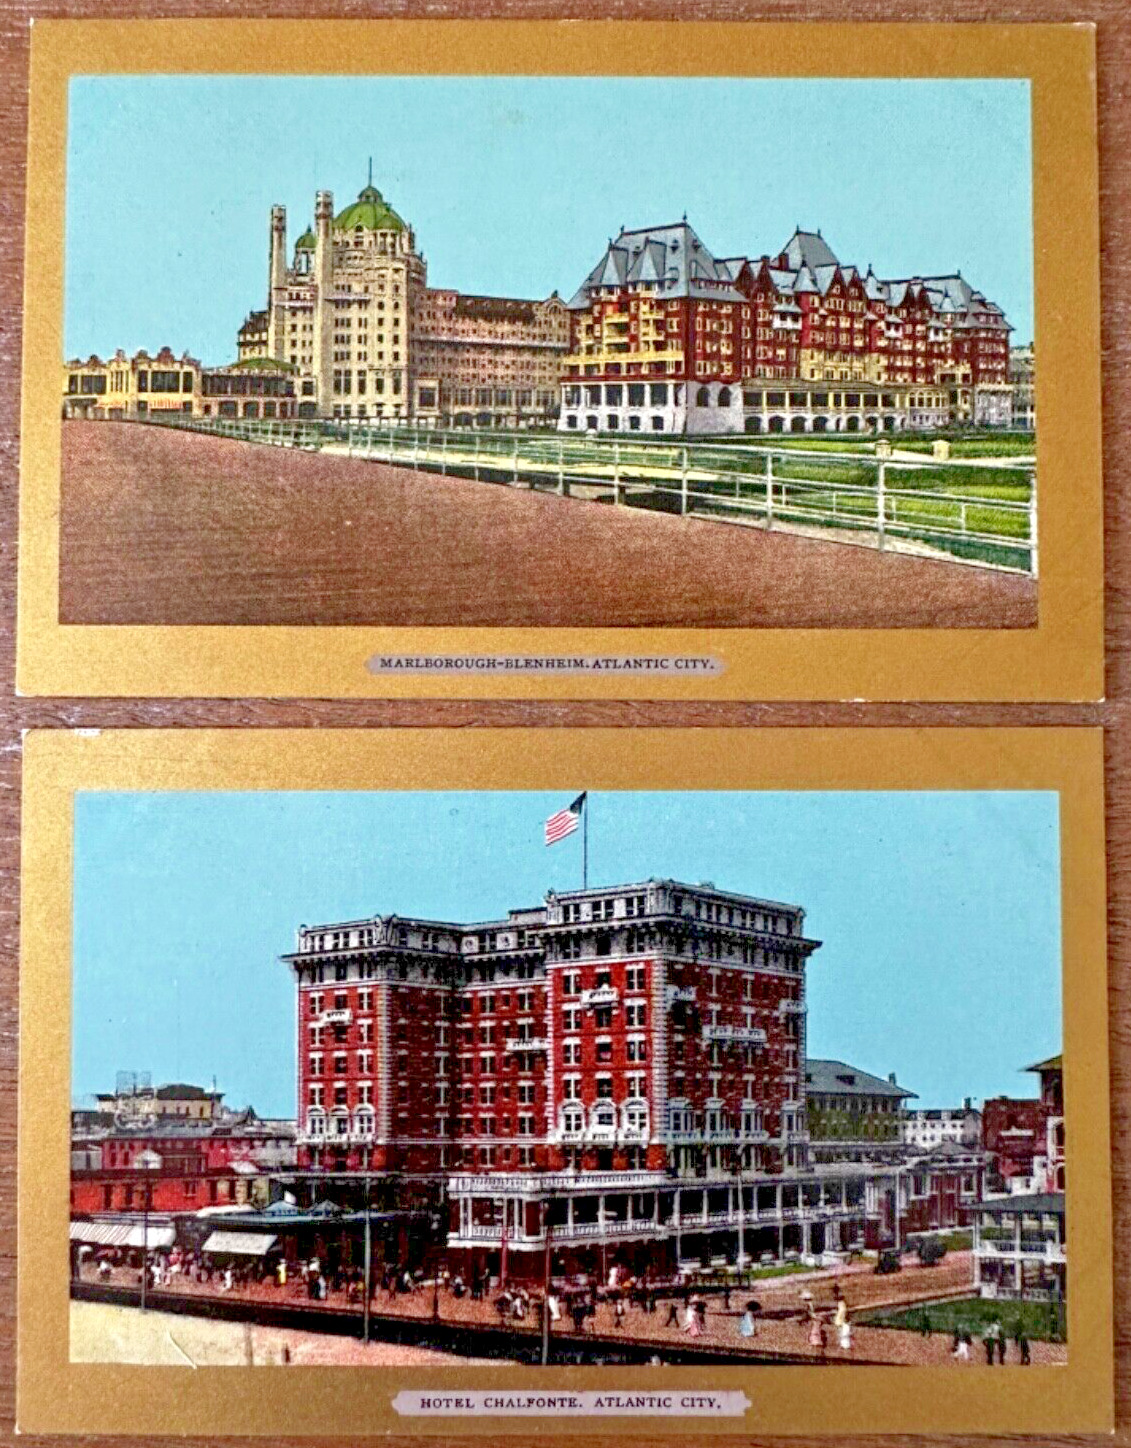 Two PCs Marlborough-Blenheim and Hotel Chalfonte in Atlantic City, New Jersey